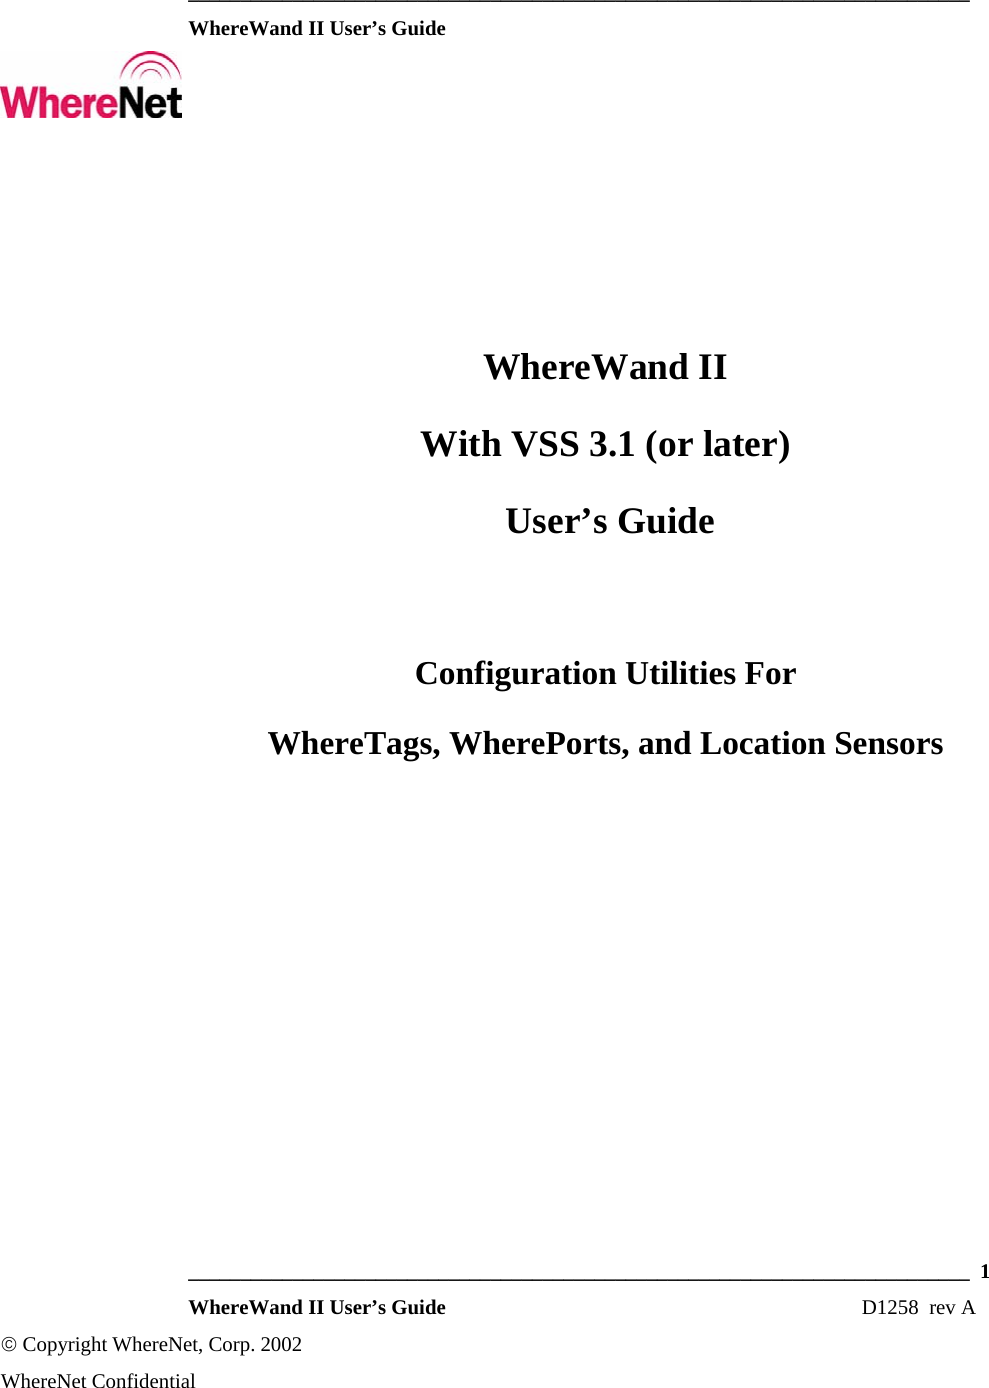  ___________________________________________________________________________  WhereWand II User’s Guide     ___________________________________________________________________________  1  WhereWand II User’s Guide                                                                          D1258  rev A © Copyright WhereNet, Corp. 2002  WhereNet Confidential WhereWand II With VSS 3.1 (or later)  User’s Guide  Configuration Utilities For WhereTags, WherePorts, and Location Sensors       